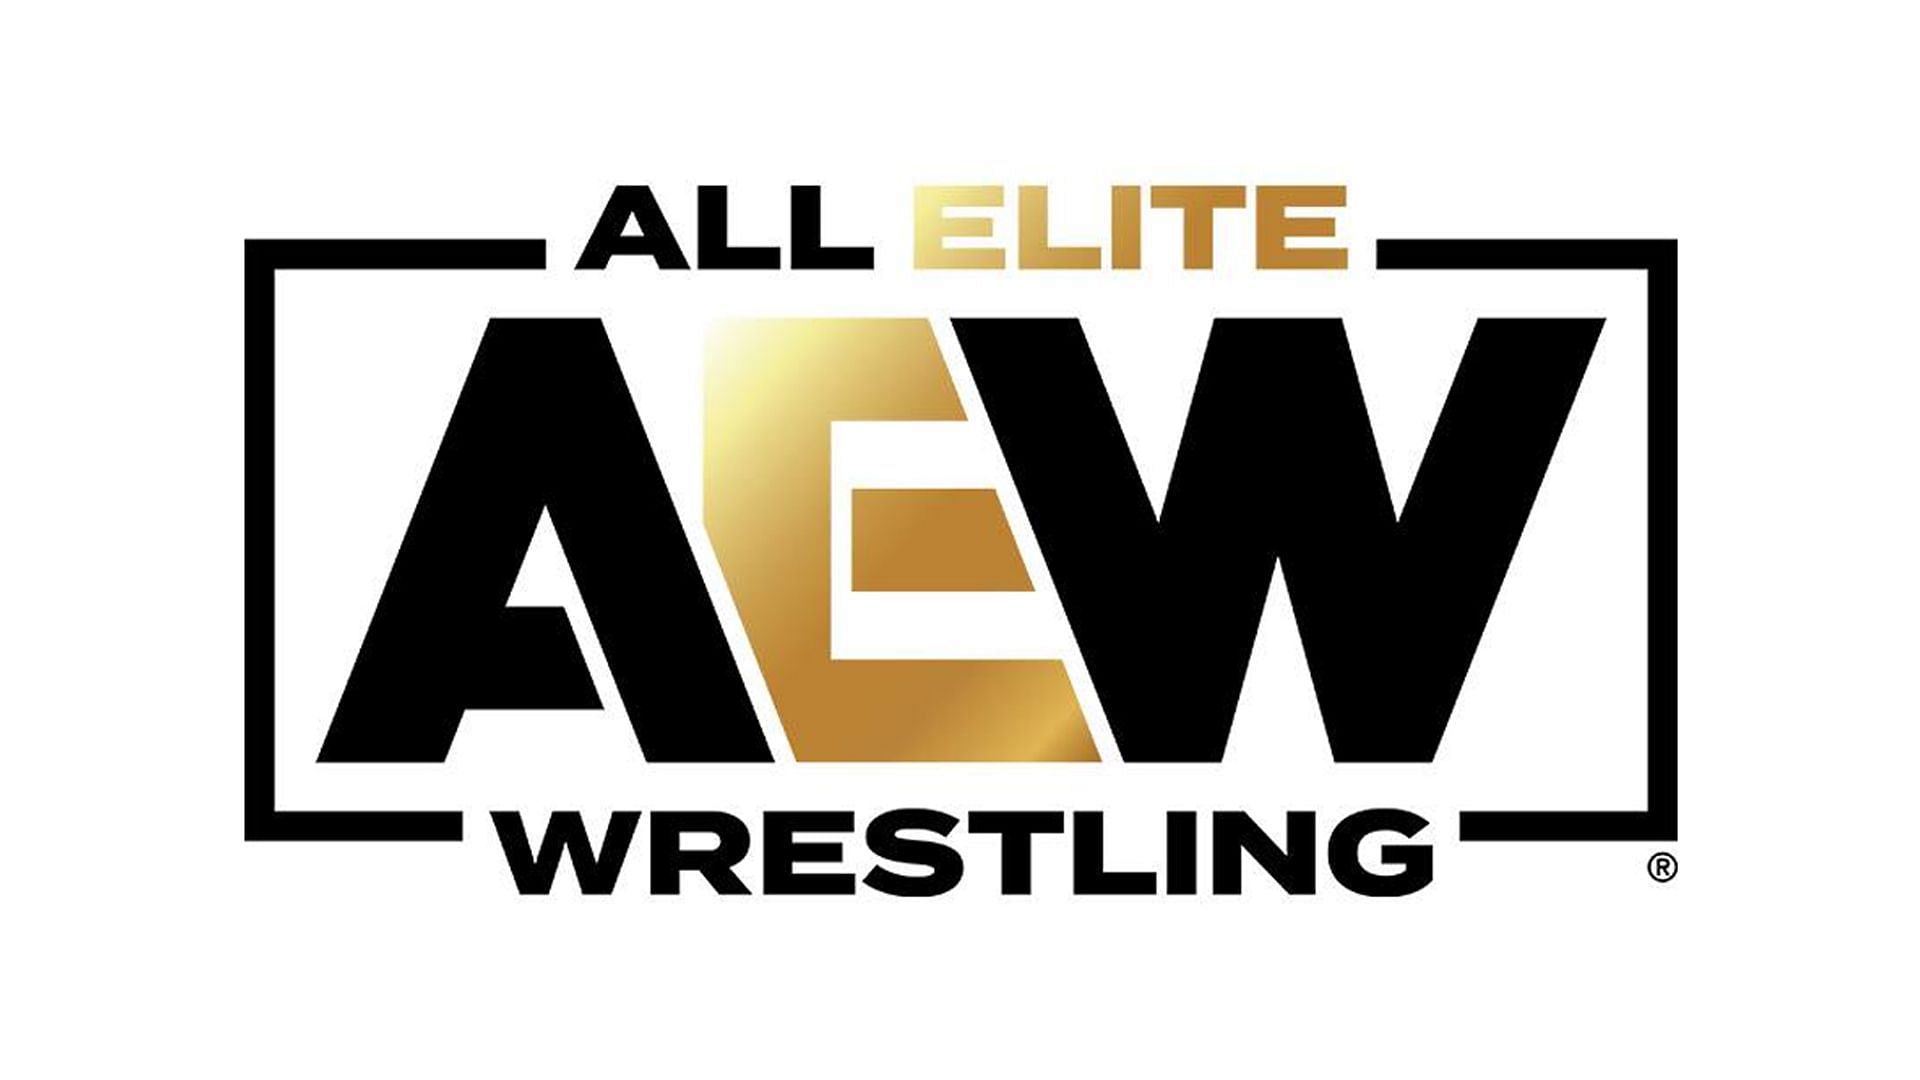 AEW has been a direct competitor to WWE since 2019